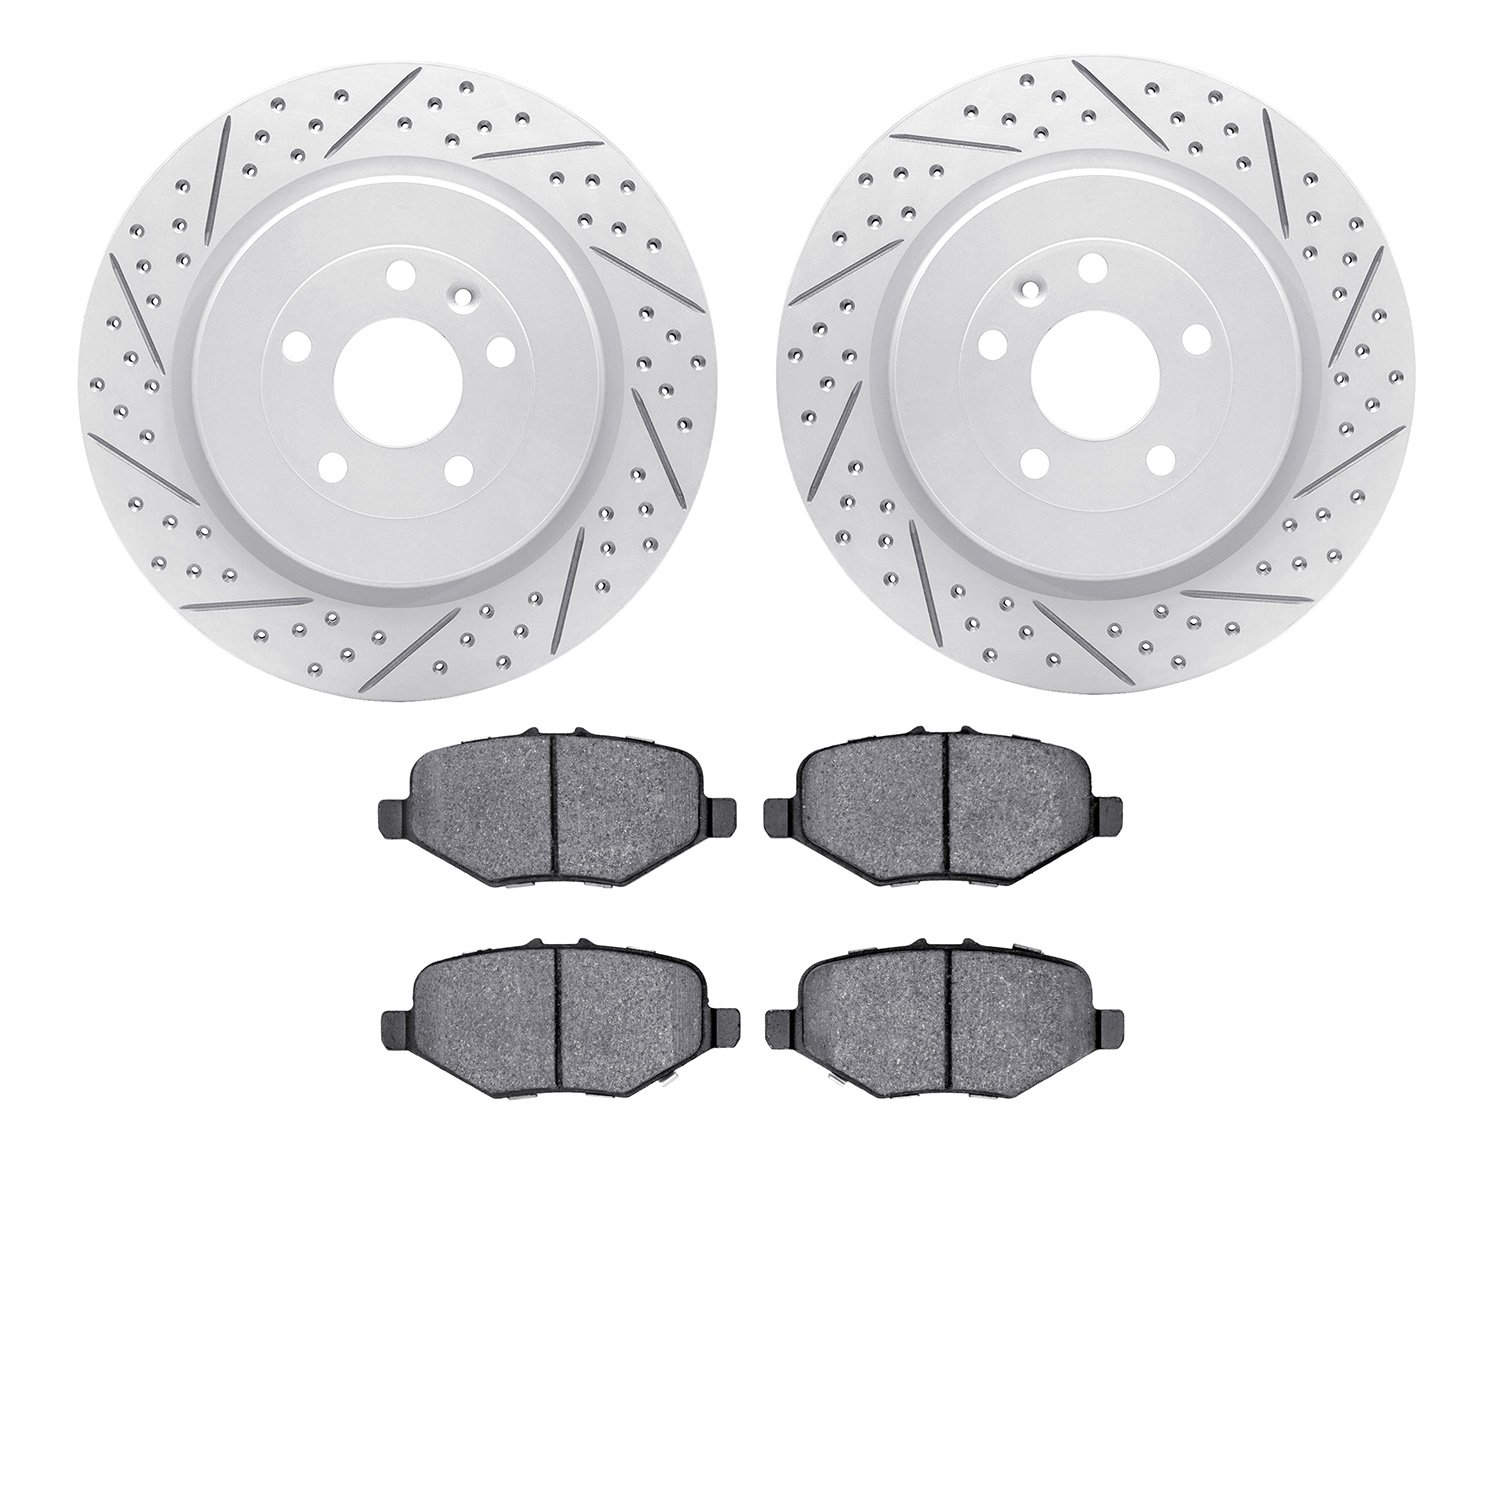 2502-54214 Geoperformance Drilled/Slotted Rotors w/5000 Advanced Brake Pads Kit, 2013-2019 Ford/Lincoln/Mercury/Mazda, Position: